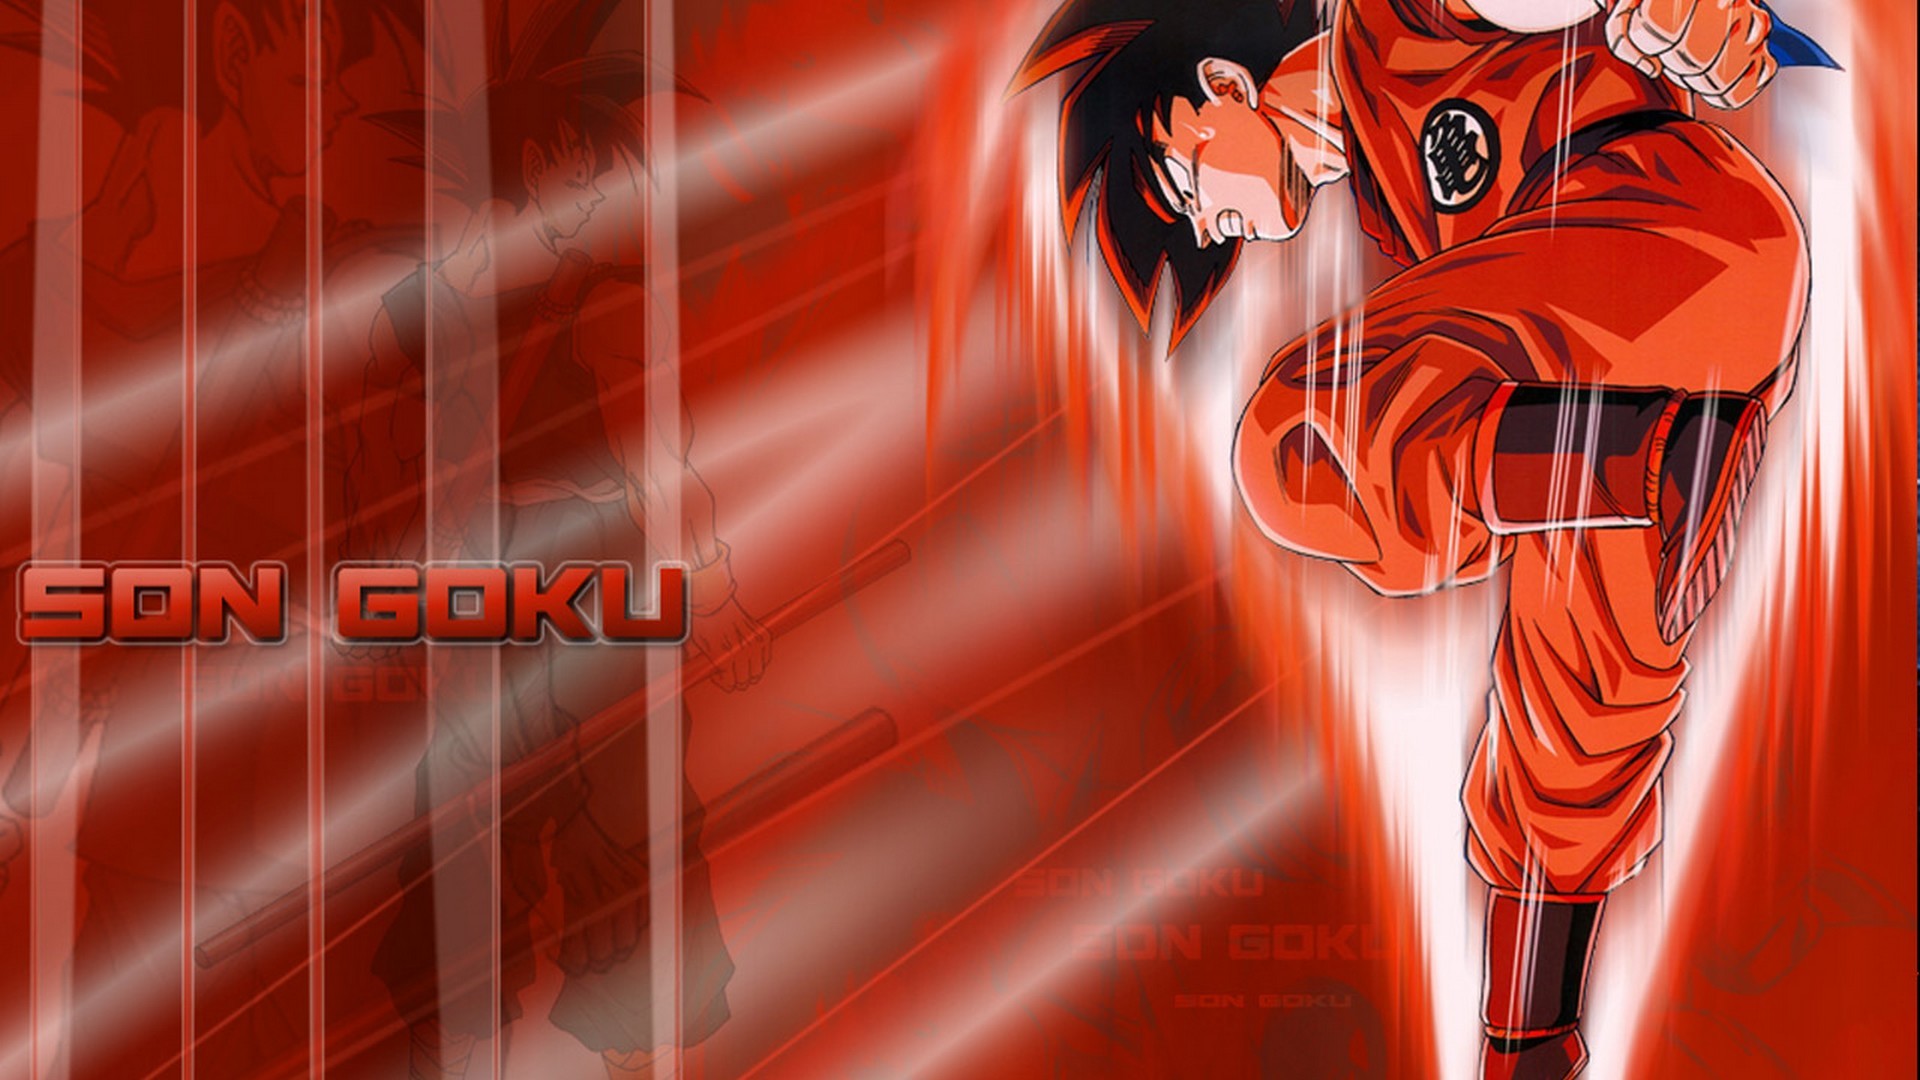 Goku Imagenes Desktop Backgrounds HD with image resolution 1920x1080 pixel. You can use this wallpaper as background for your desktop Computer Screensavers, Android or iPhone smartphones